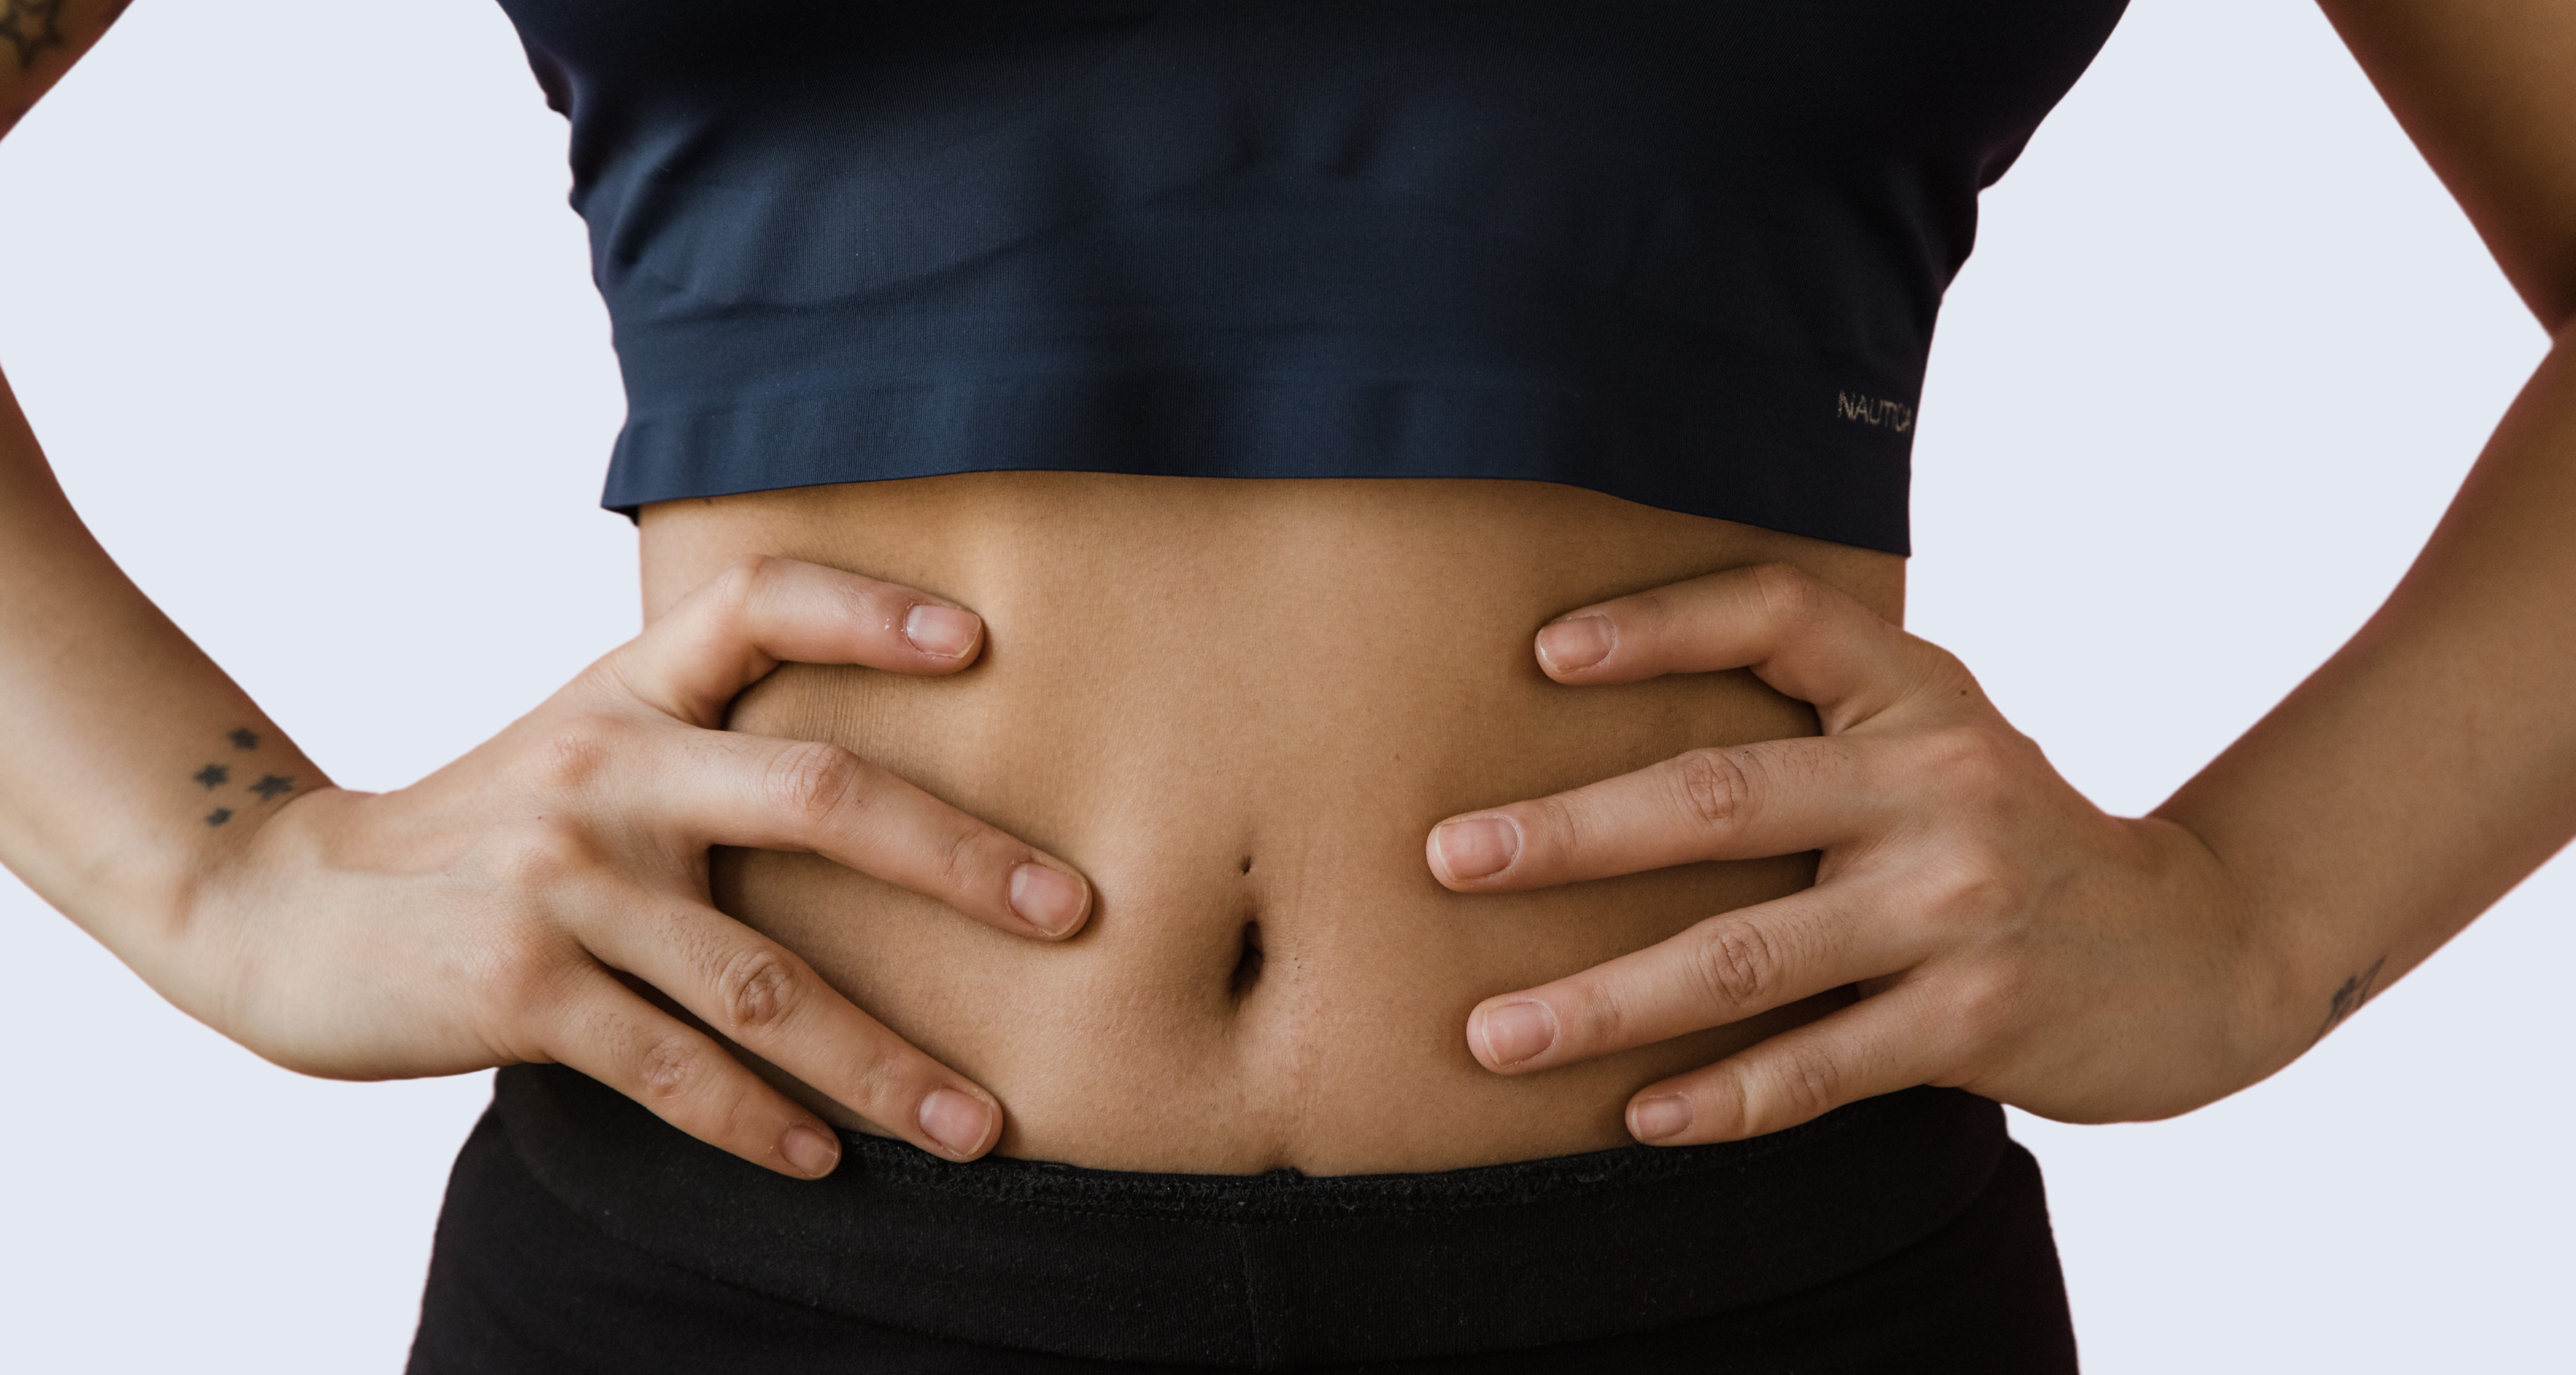 Women's abdominal and her hands are on her waist